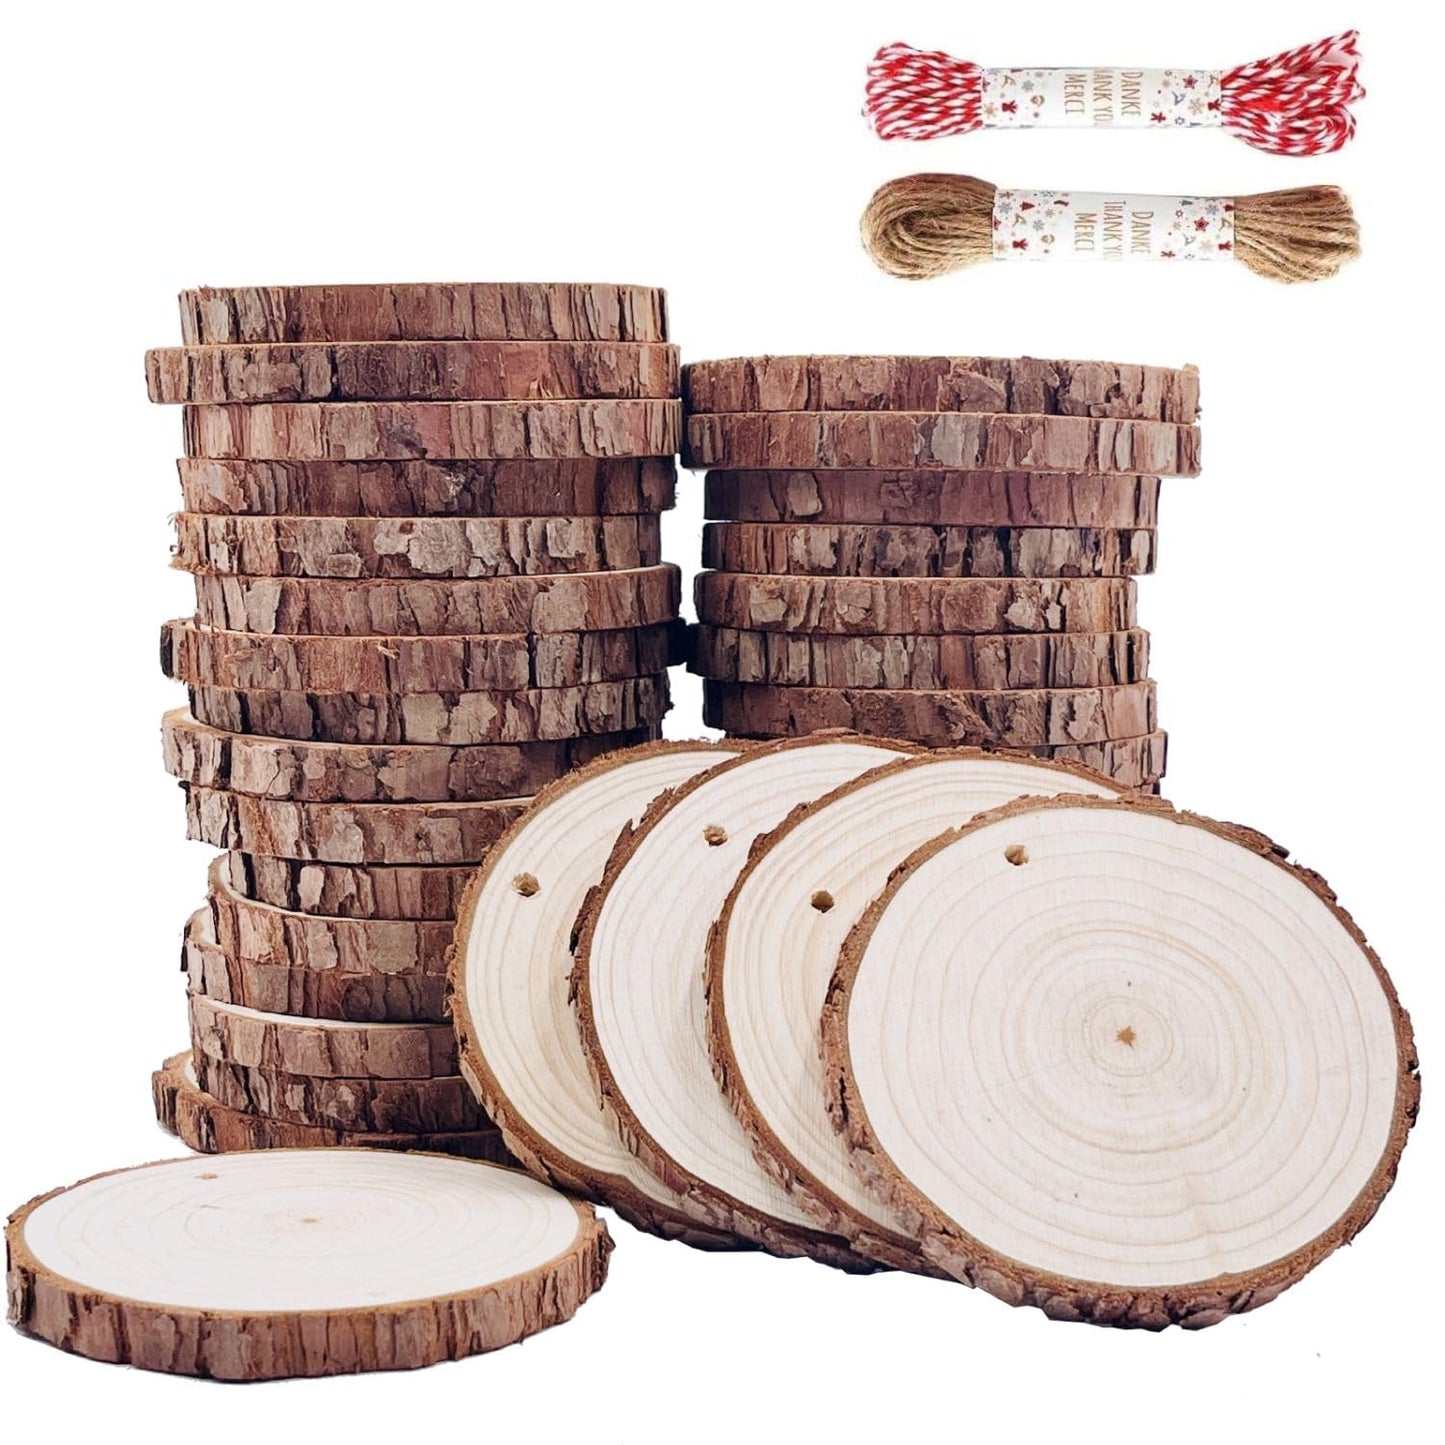 Unfinished Natural Wood Slices 32 Pcs 3.5-4 Inch Wood Coaster Sets Pieces Craft Wood kit Predrilled with Hole Wooden Circles Great for Arts and